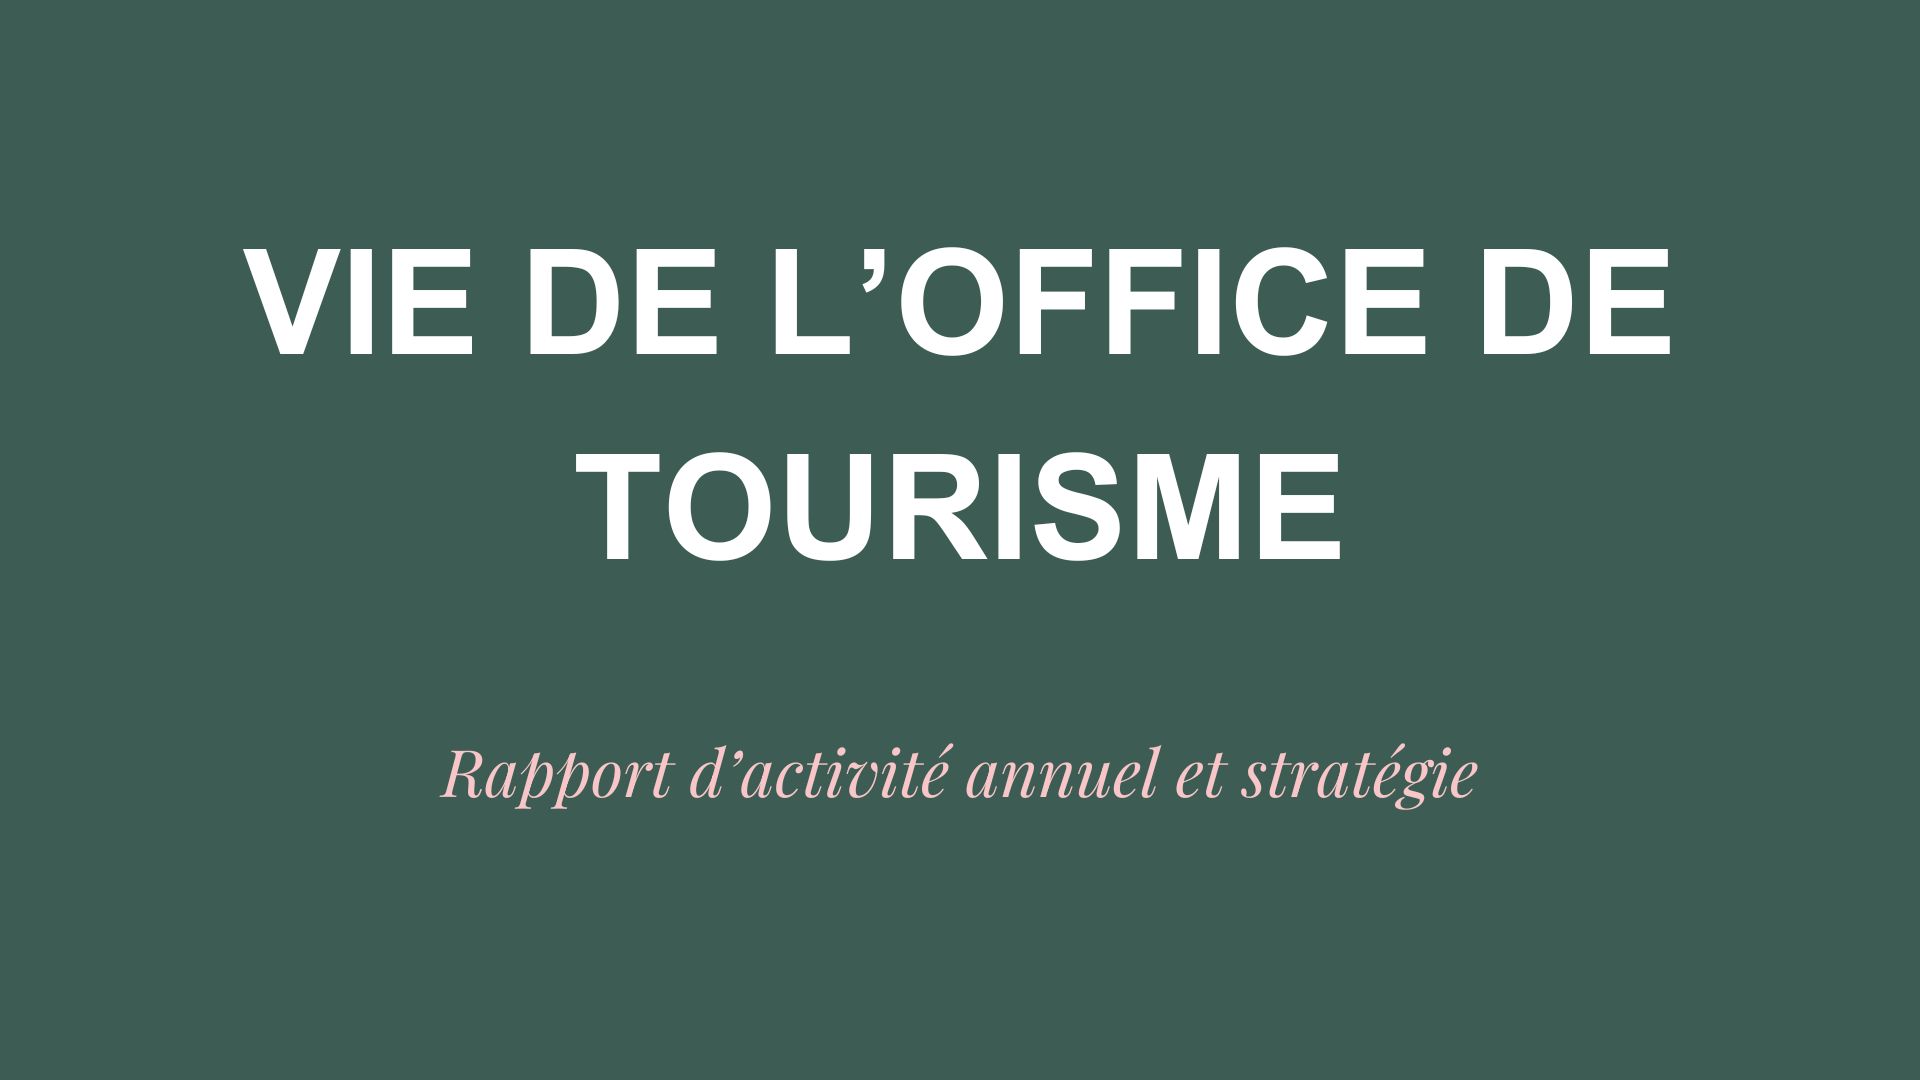 NEWS FROM THE TOURIST OFFICE